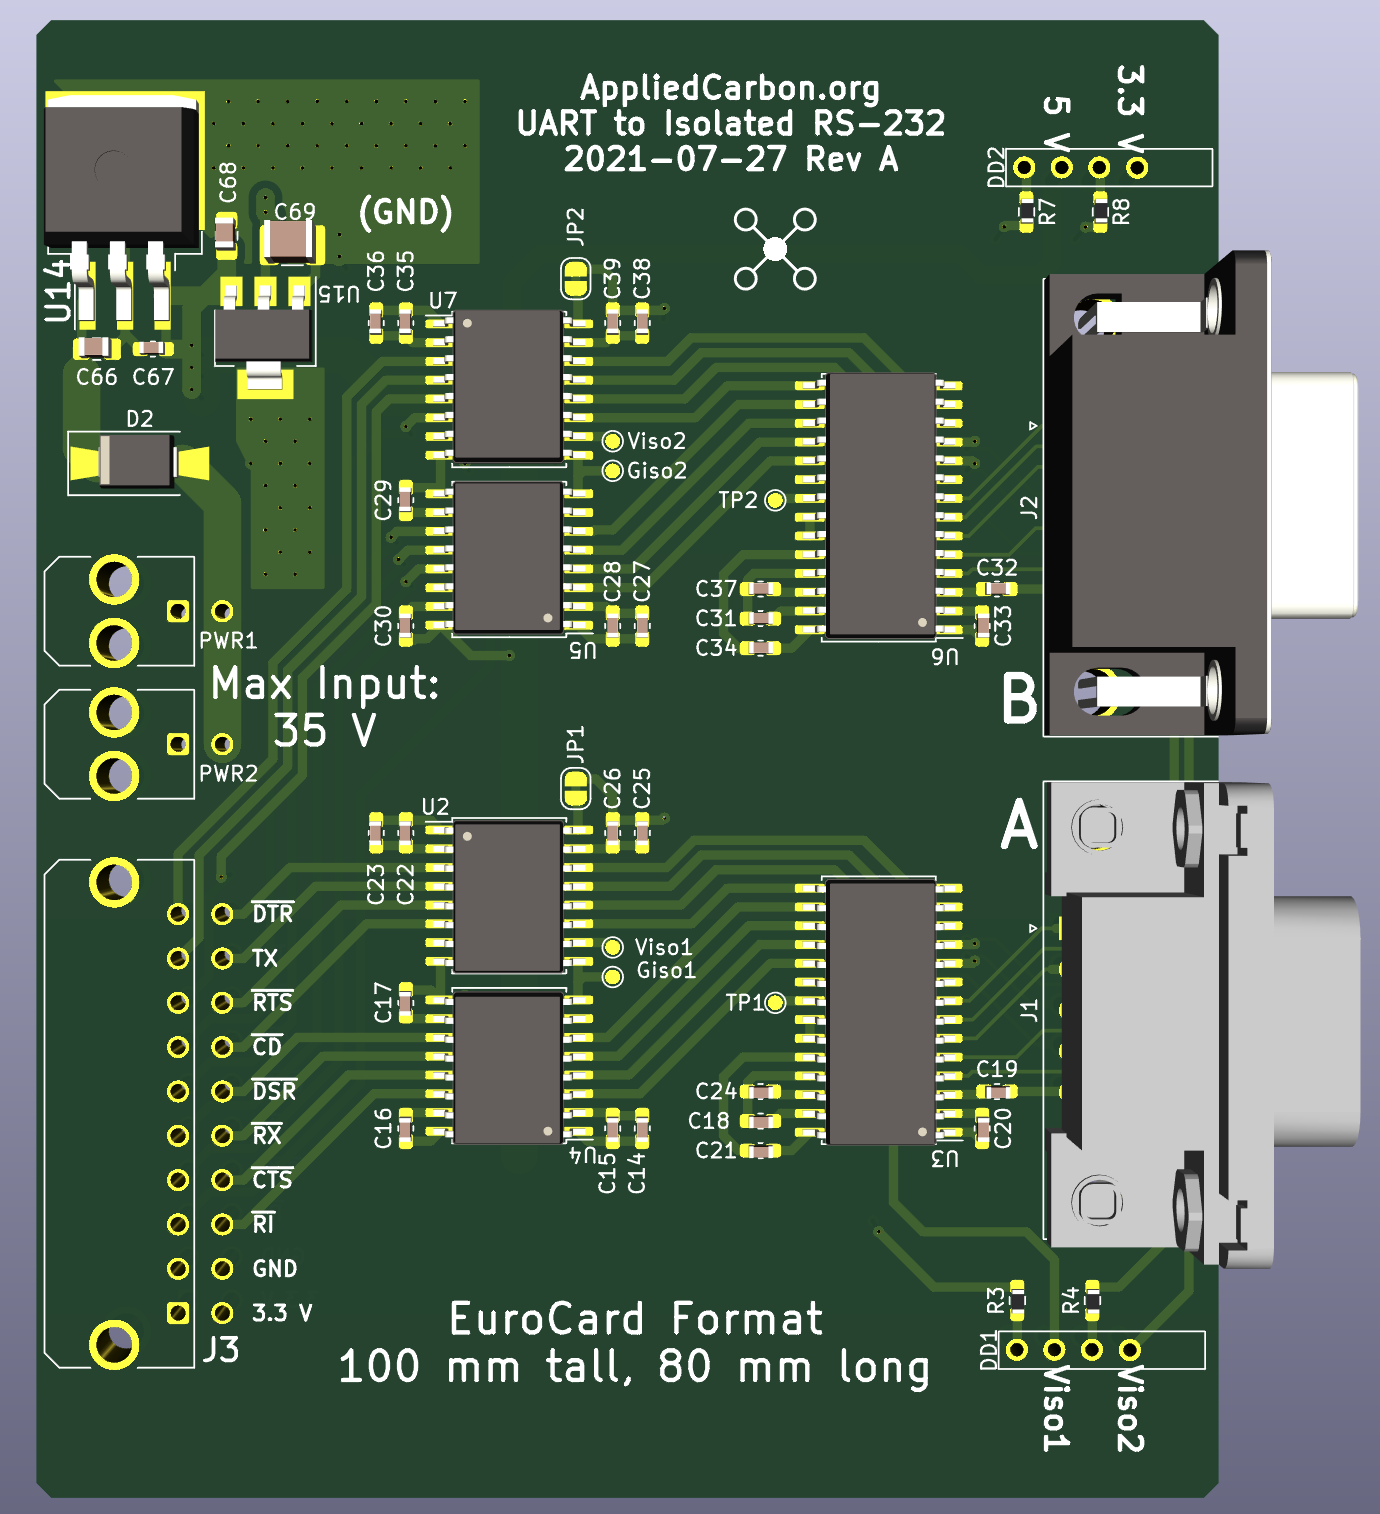 Top view of Serial Card, 3D rendering to show part layout.